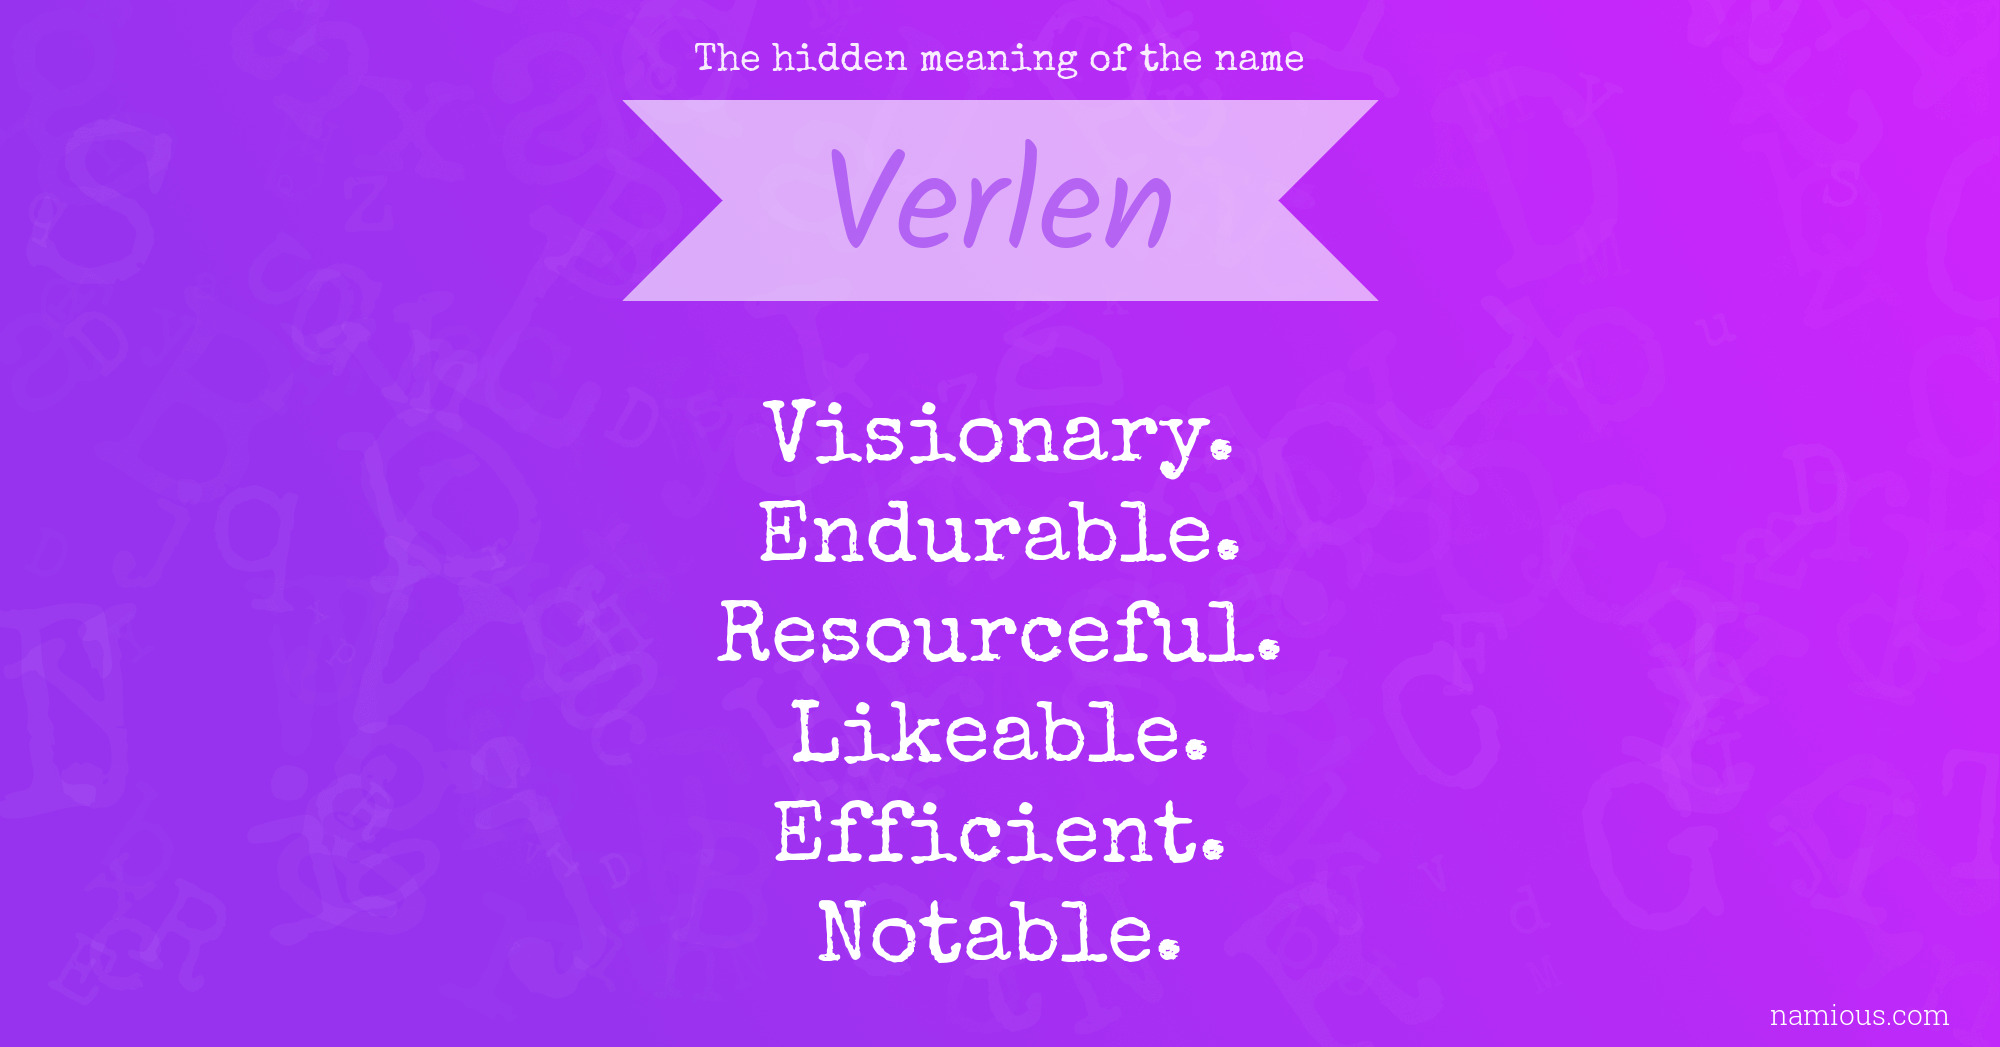 The hidden meaning of the name Verlen